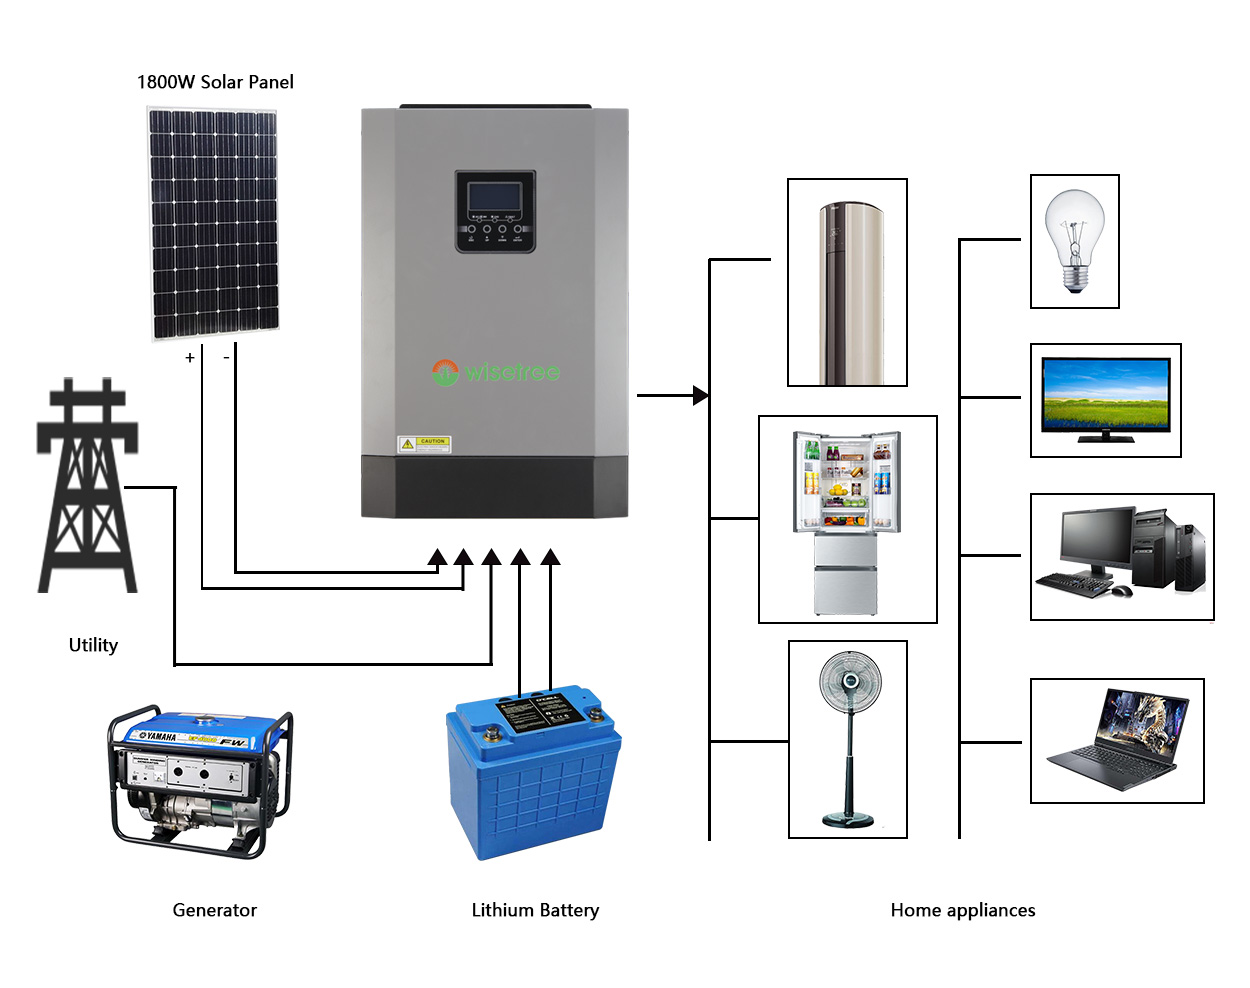 It can effectively integrate solar panels and grid power to provide users with a more stable and reliable power supply.